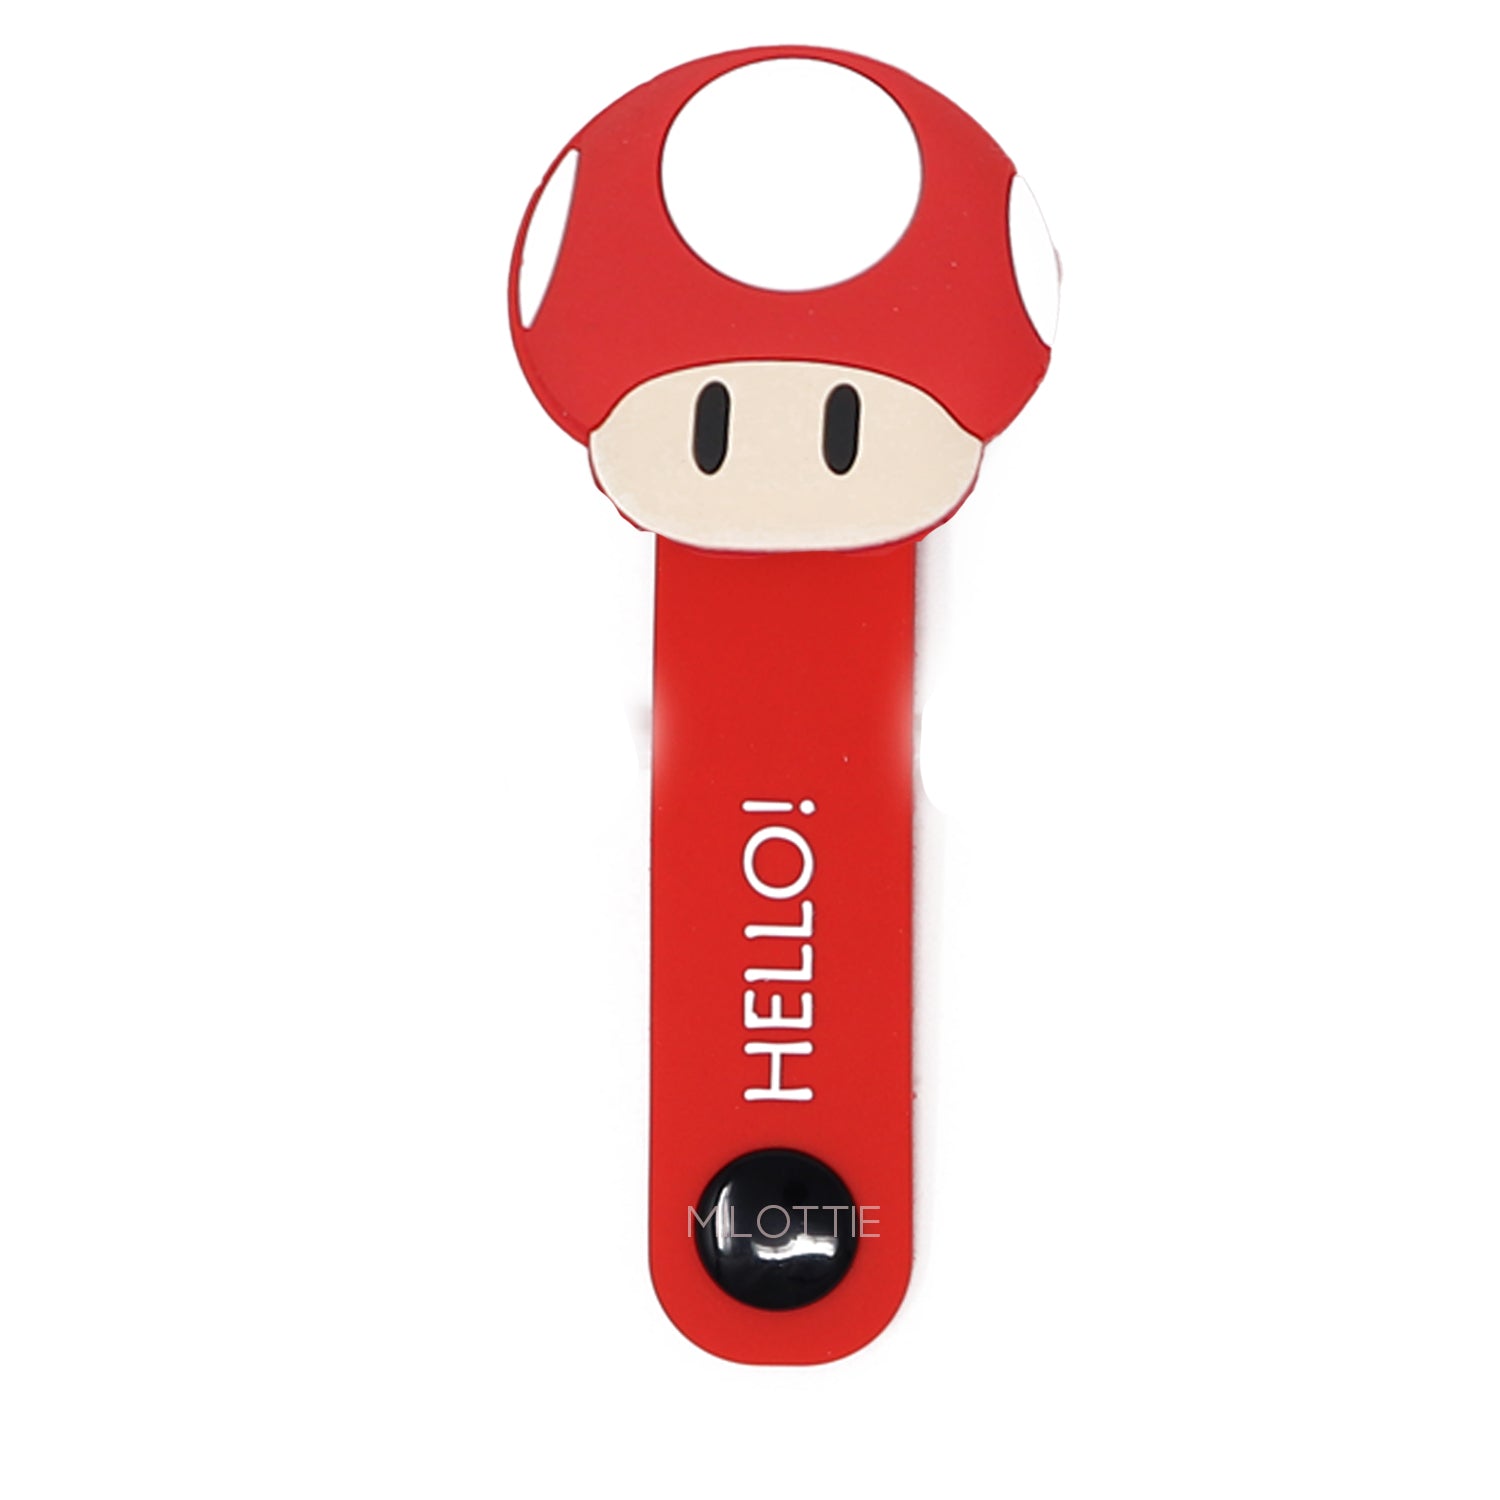 Power Up Mushroom Snap Button Cable Organizer